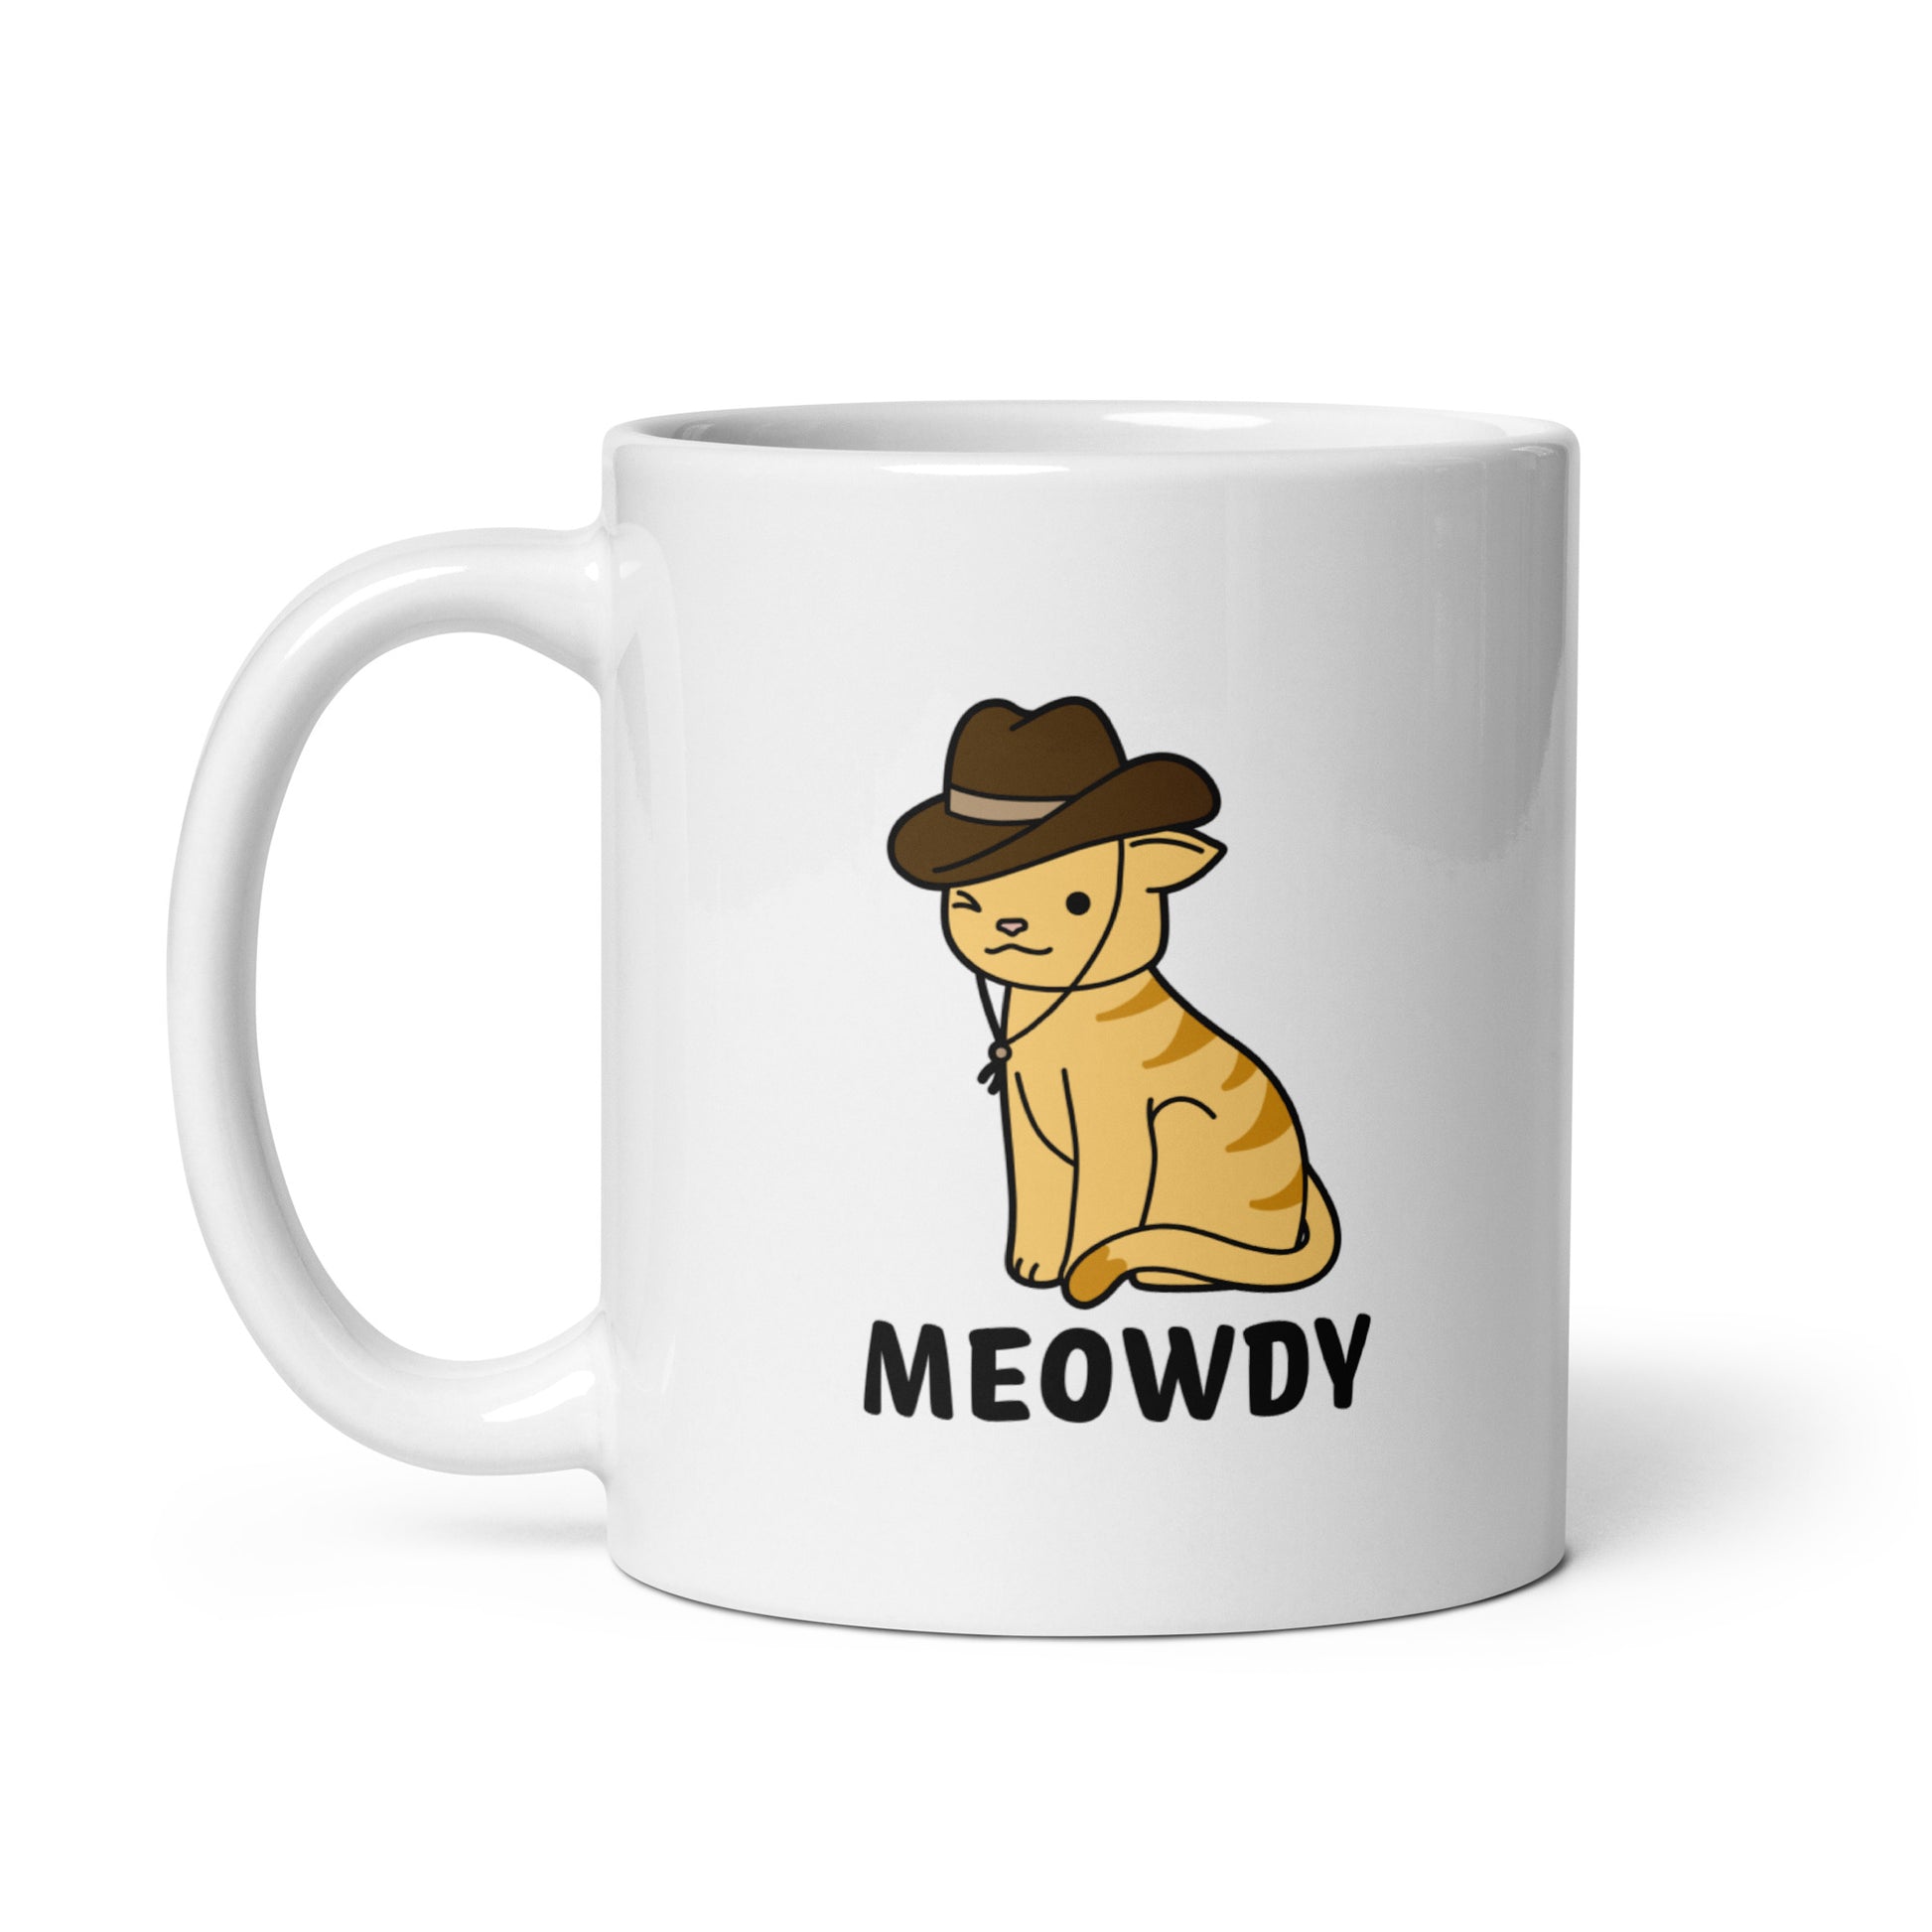 A white, 11 ounce ceramic coffee mug featuring an illustration of an orange striped cat wearing a cowboy hat. The cat is winking and smiling, and text beneath him reads "Meowdy"